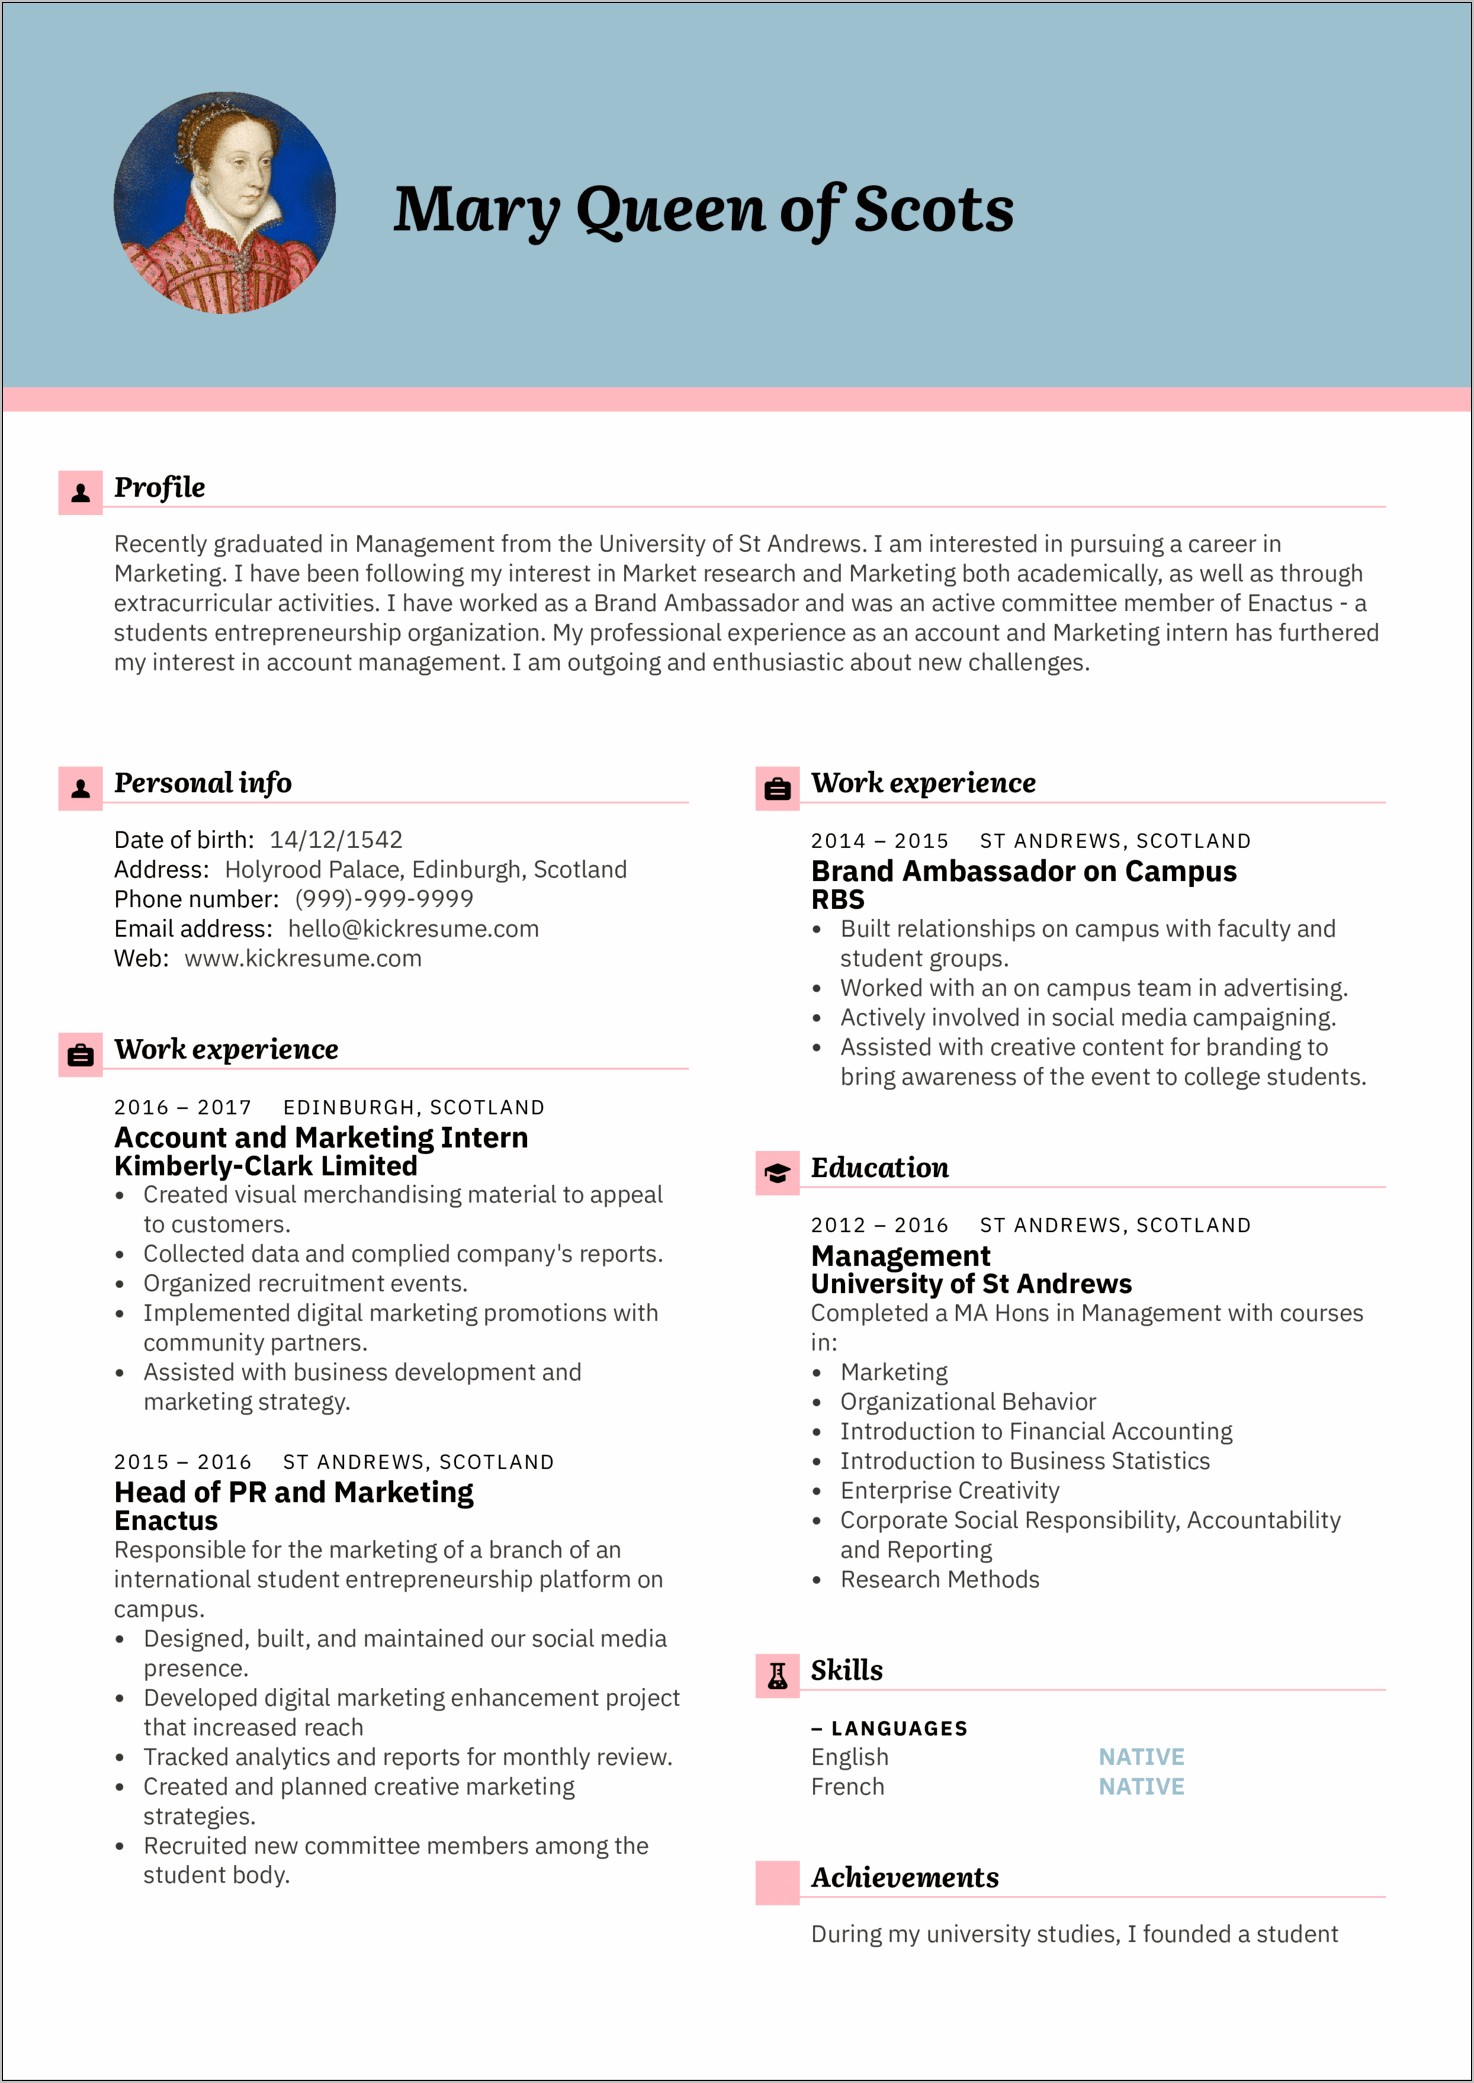 Recruitment Account Manager Resume Sample